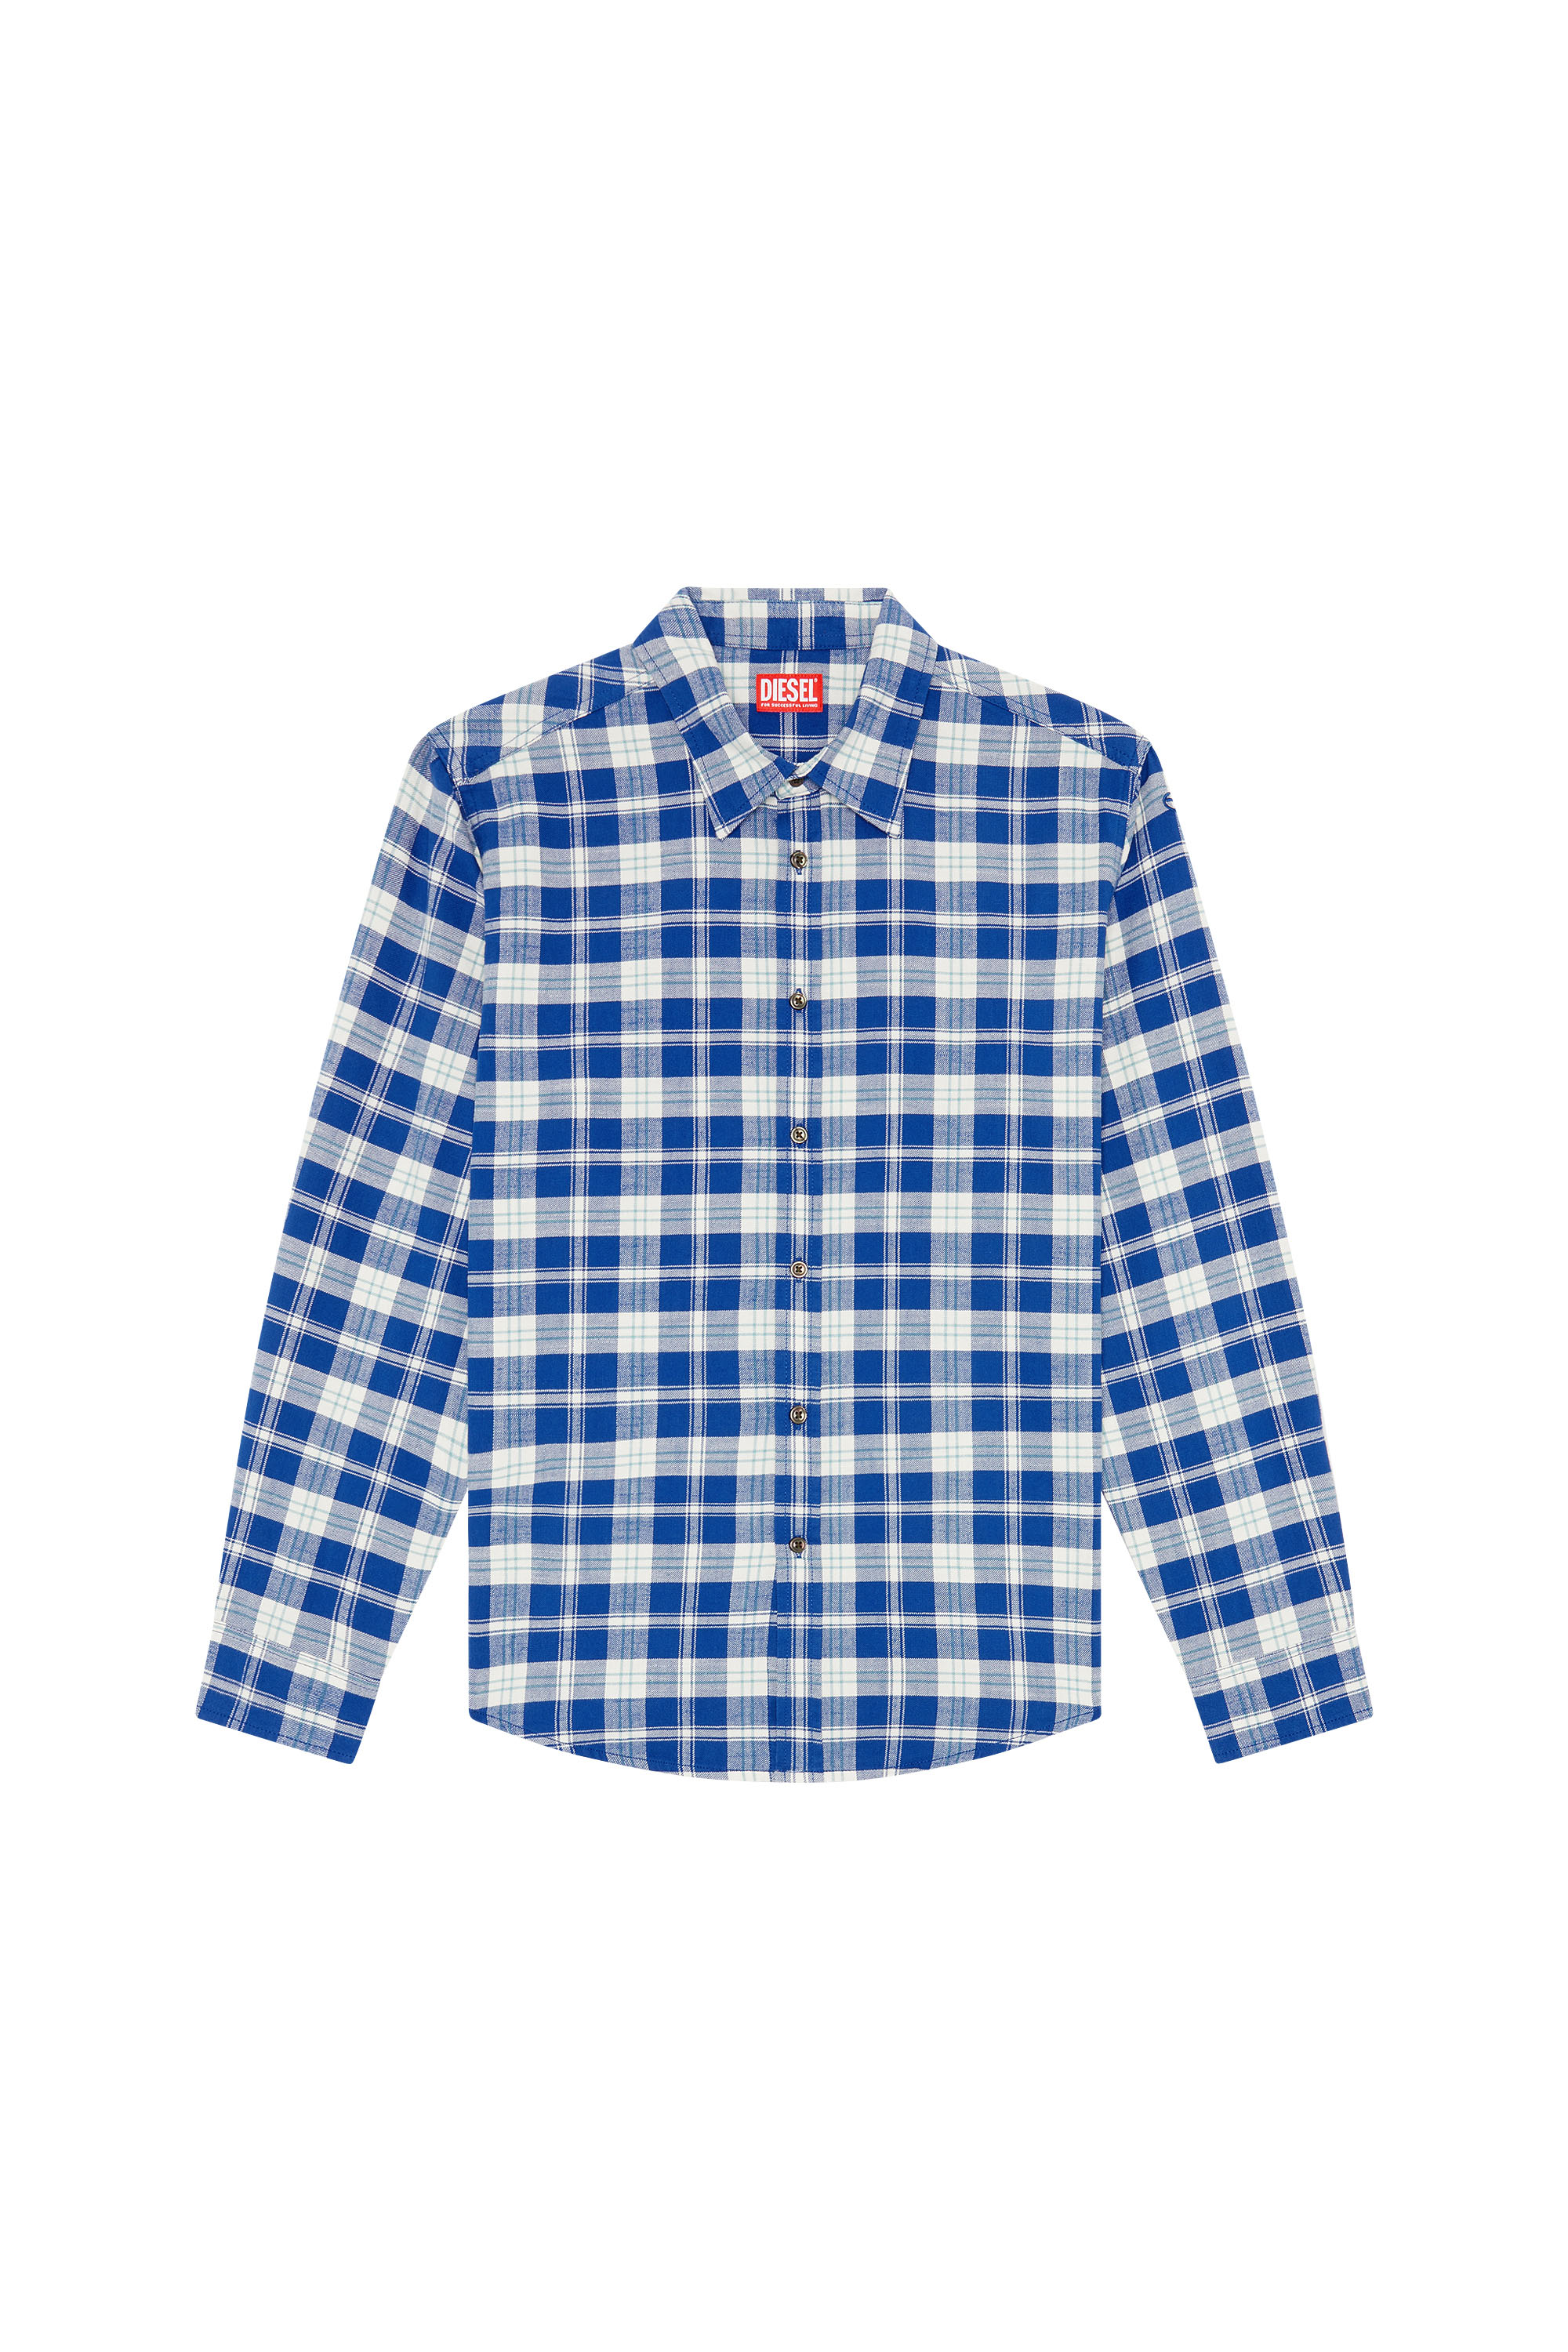 Diesel - S-UMBE-CHECK-NW, Blue/White - Image 3